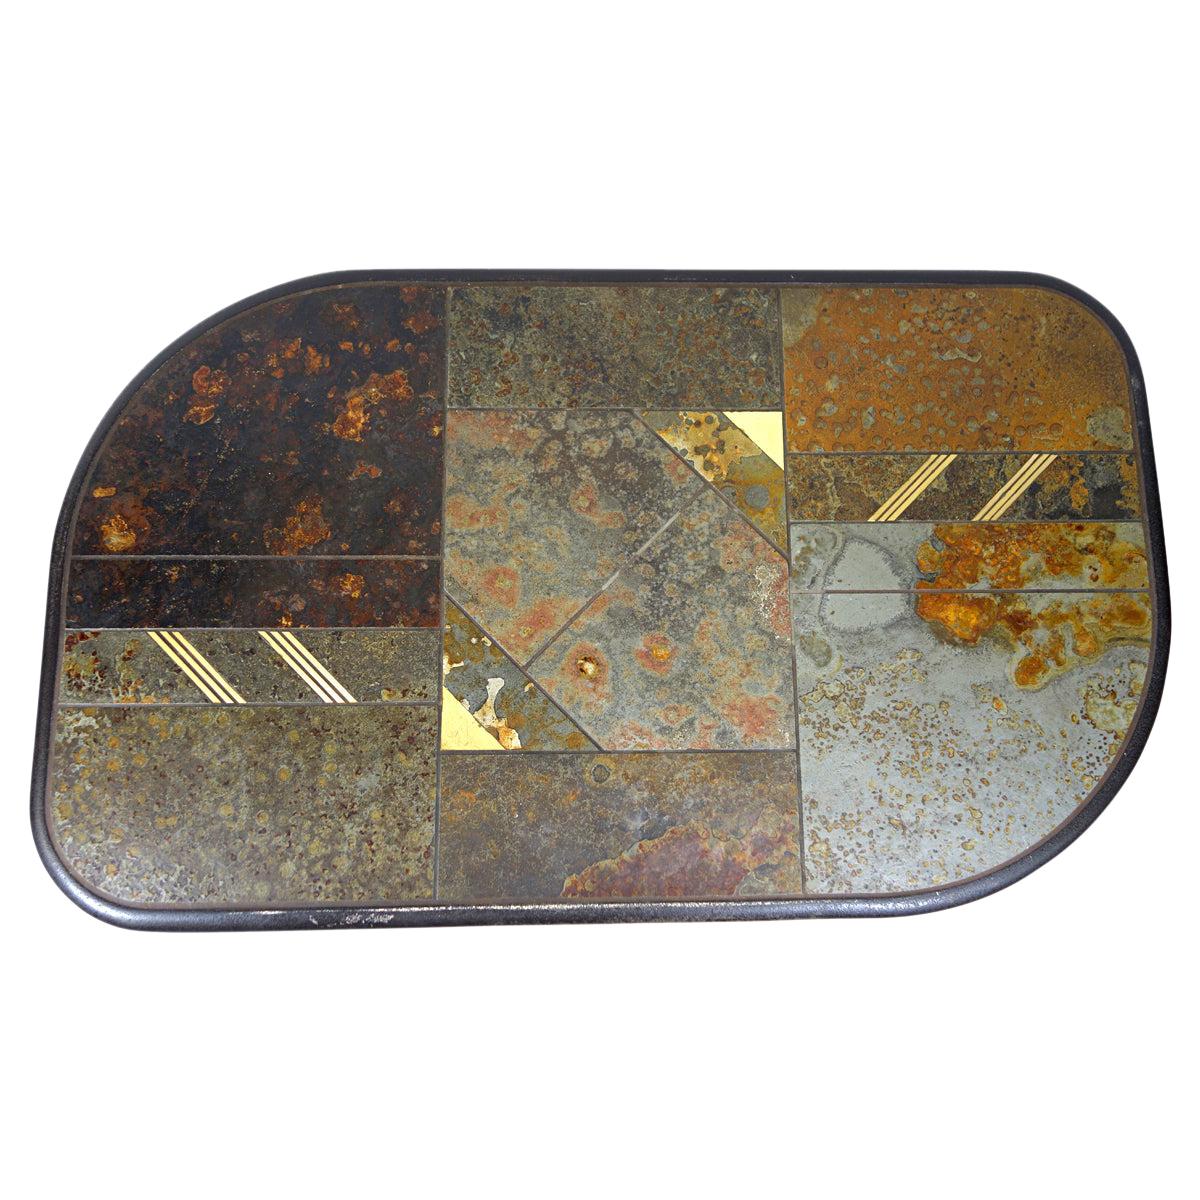 Brutalist Coffee Table Attributed to Paul Kingma Made of Stone, Slate and Brass For Sale